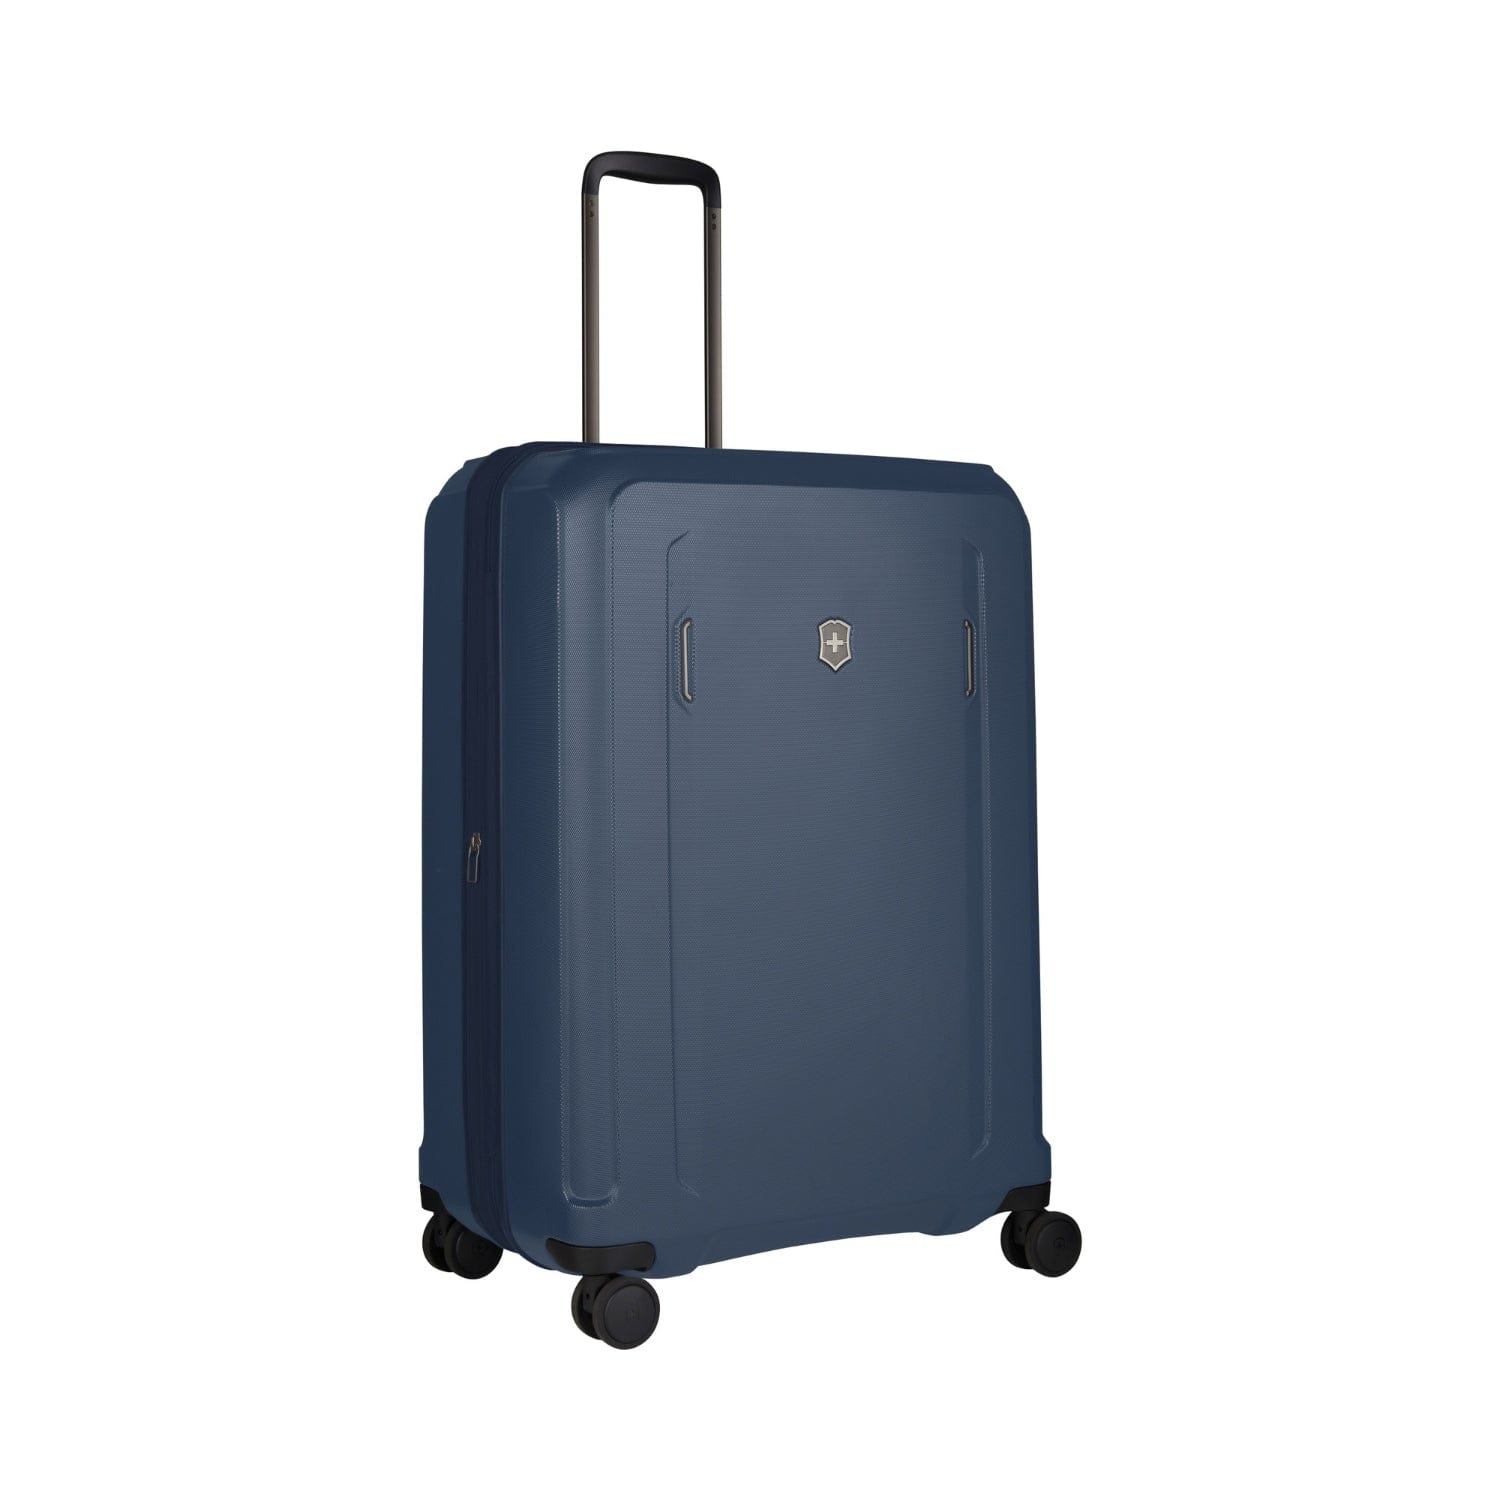 Victorinox Werks Traveler 6.0 74cm Hardcase Expandable 4 Double Wheel Check-In Luggage Trolley Blue - 609973